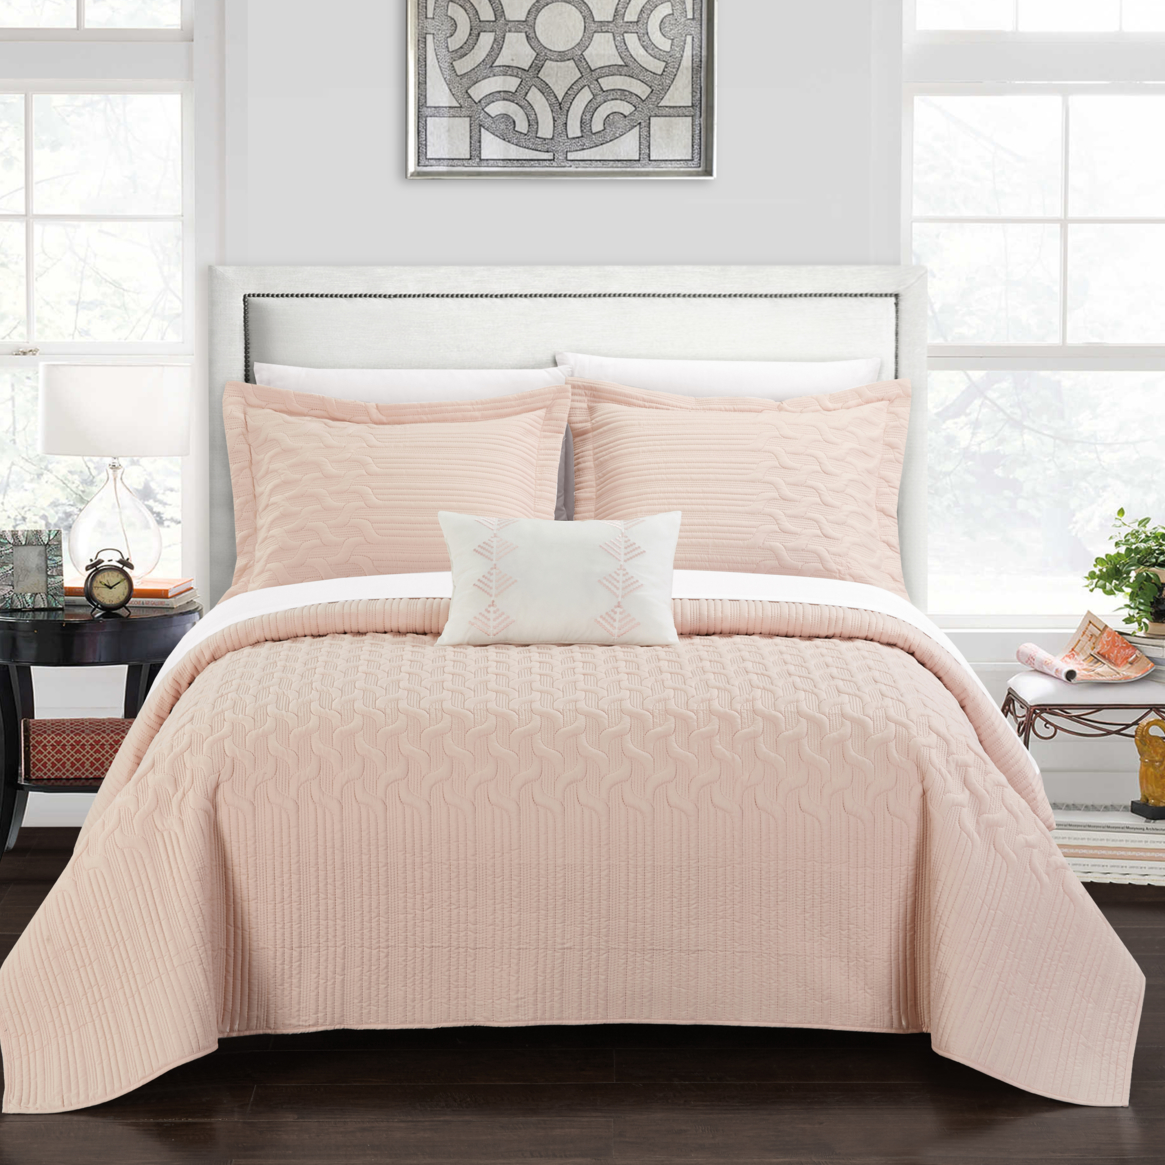 Shaliya 8 Or 6 Piece Quilt Cover Set Interlaced Vine Pattern Quilted Bed In A Bag - Blush, Twin X-long